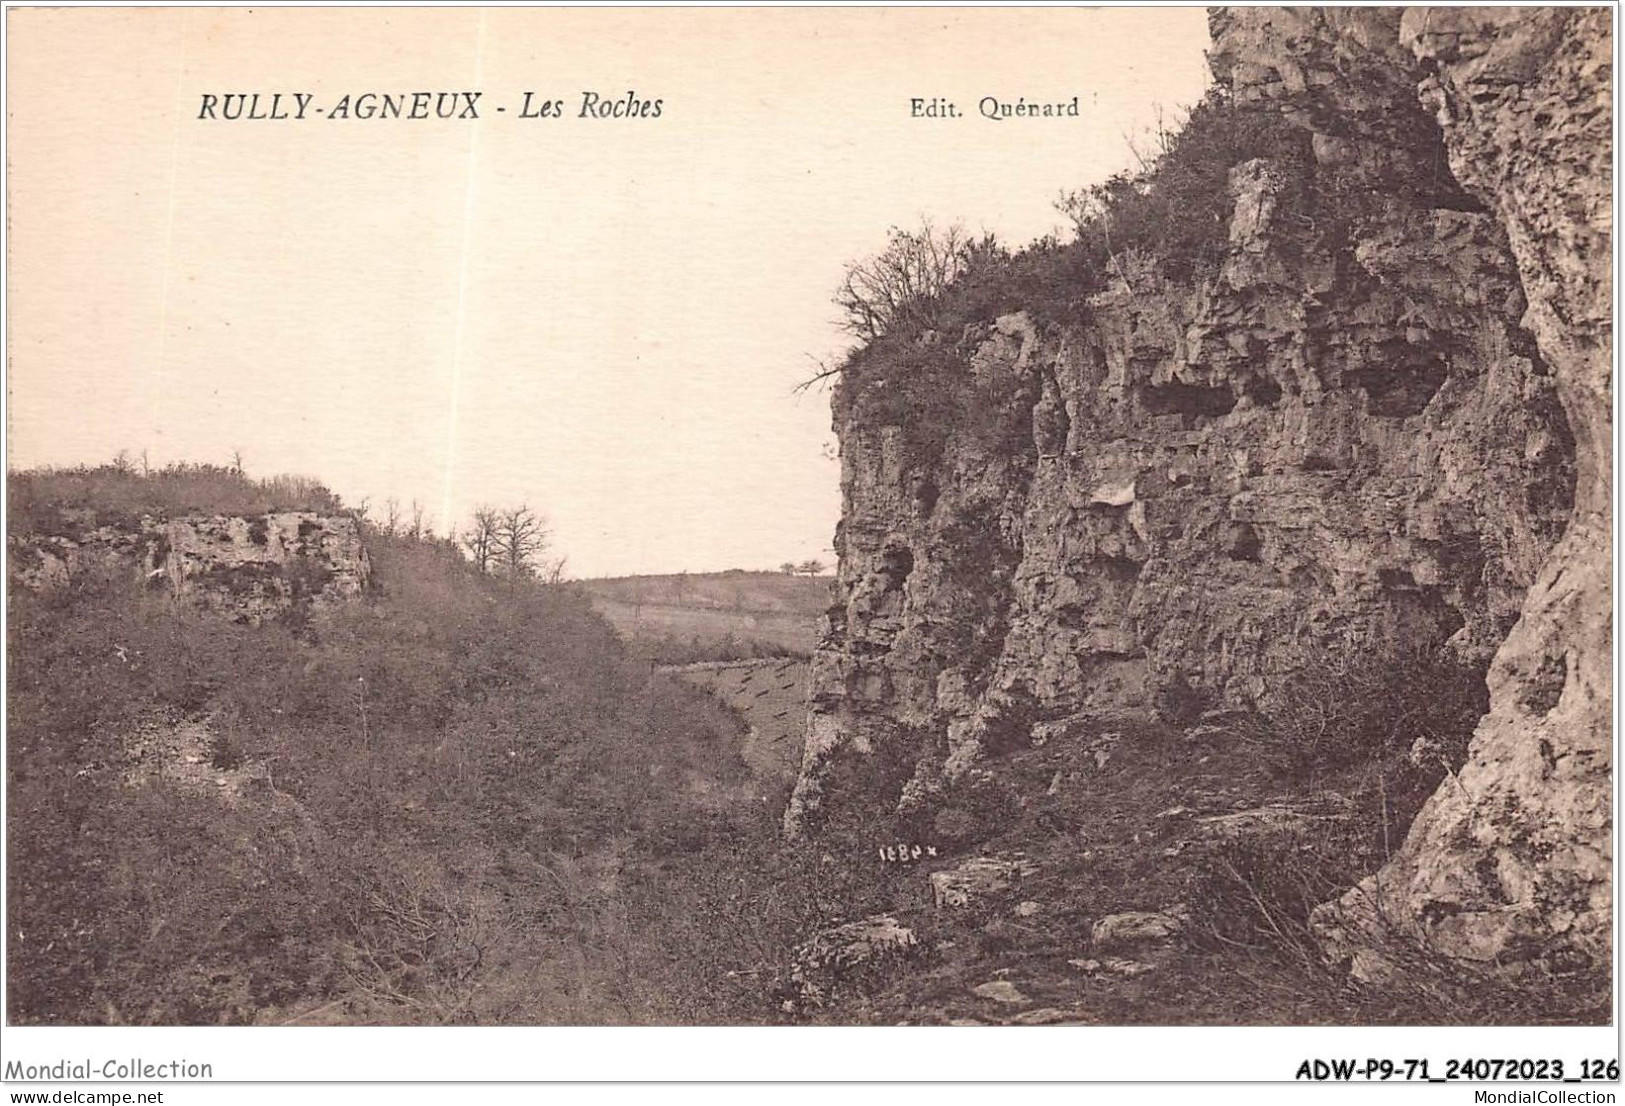 ADWP9-71-0858 - RULLY - Agneux - Les Roches  - Chalon Sur Saone